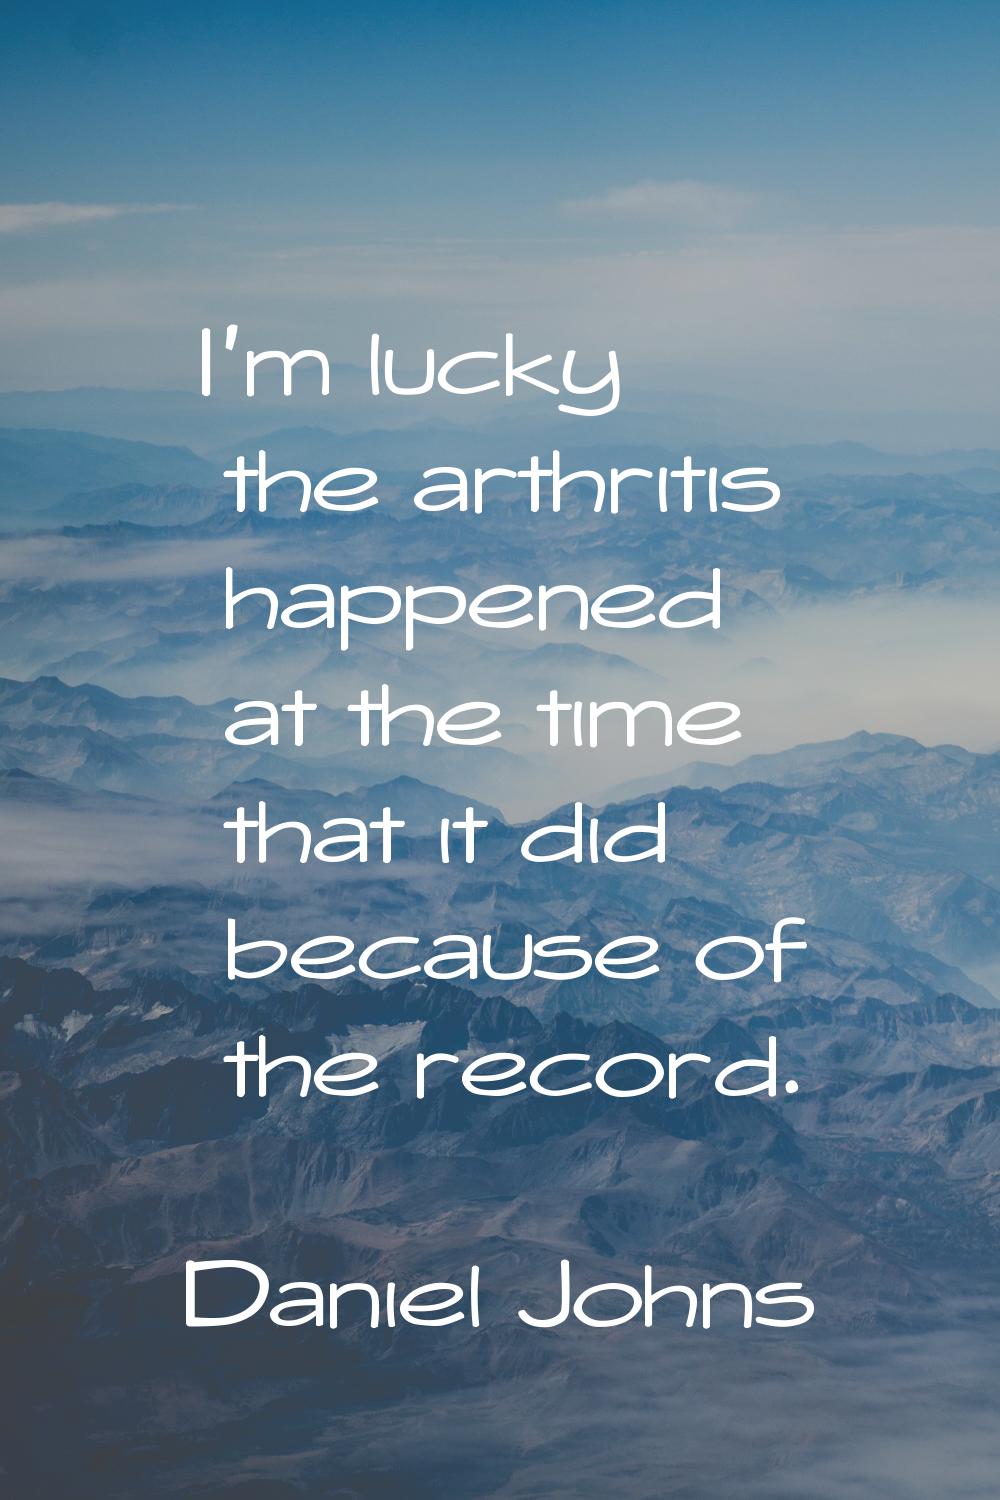 I'm lucky the arthritis happened at the time that it did because of the record.